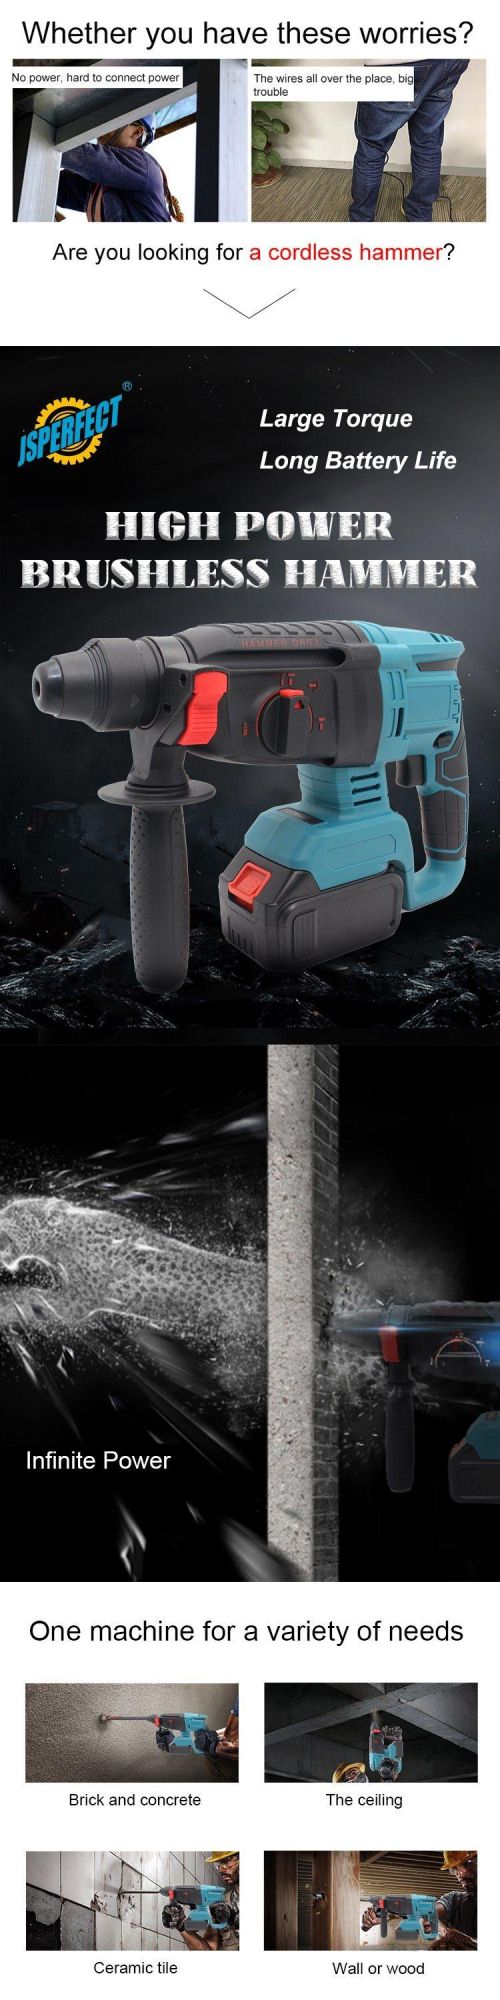 Factory Price Professional Rotary Impact Cordless Brushless Hammer Drill